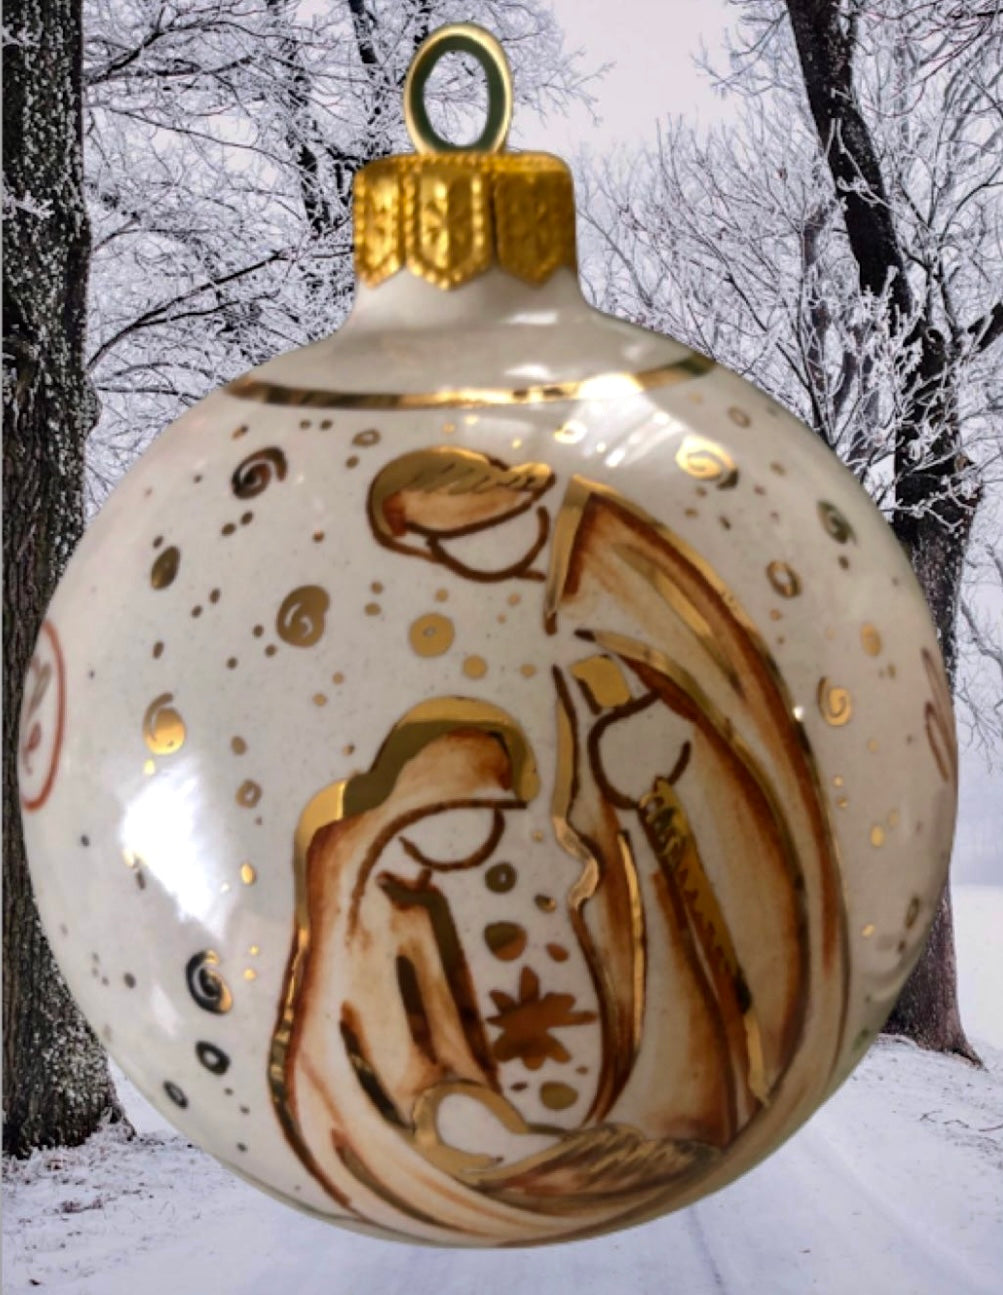 Personalized Nativity Ornament w/ 24 Karat Gold, ceramics, pottery, italian design, majolica, handmade, handcrafted, handpainted, home decor, kitchen art, home goods, deruta, majolica, Artisan, treasures, traditional art, modern art, gift ideas, style, SF, shop small business, artists, shop online, landmark store, legacy, one of a kind, limited edition, gift guide, gift shop, retail shop, decorations, shopping, italy, home staging, home decorating, home interiors